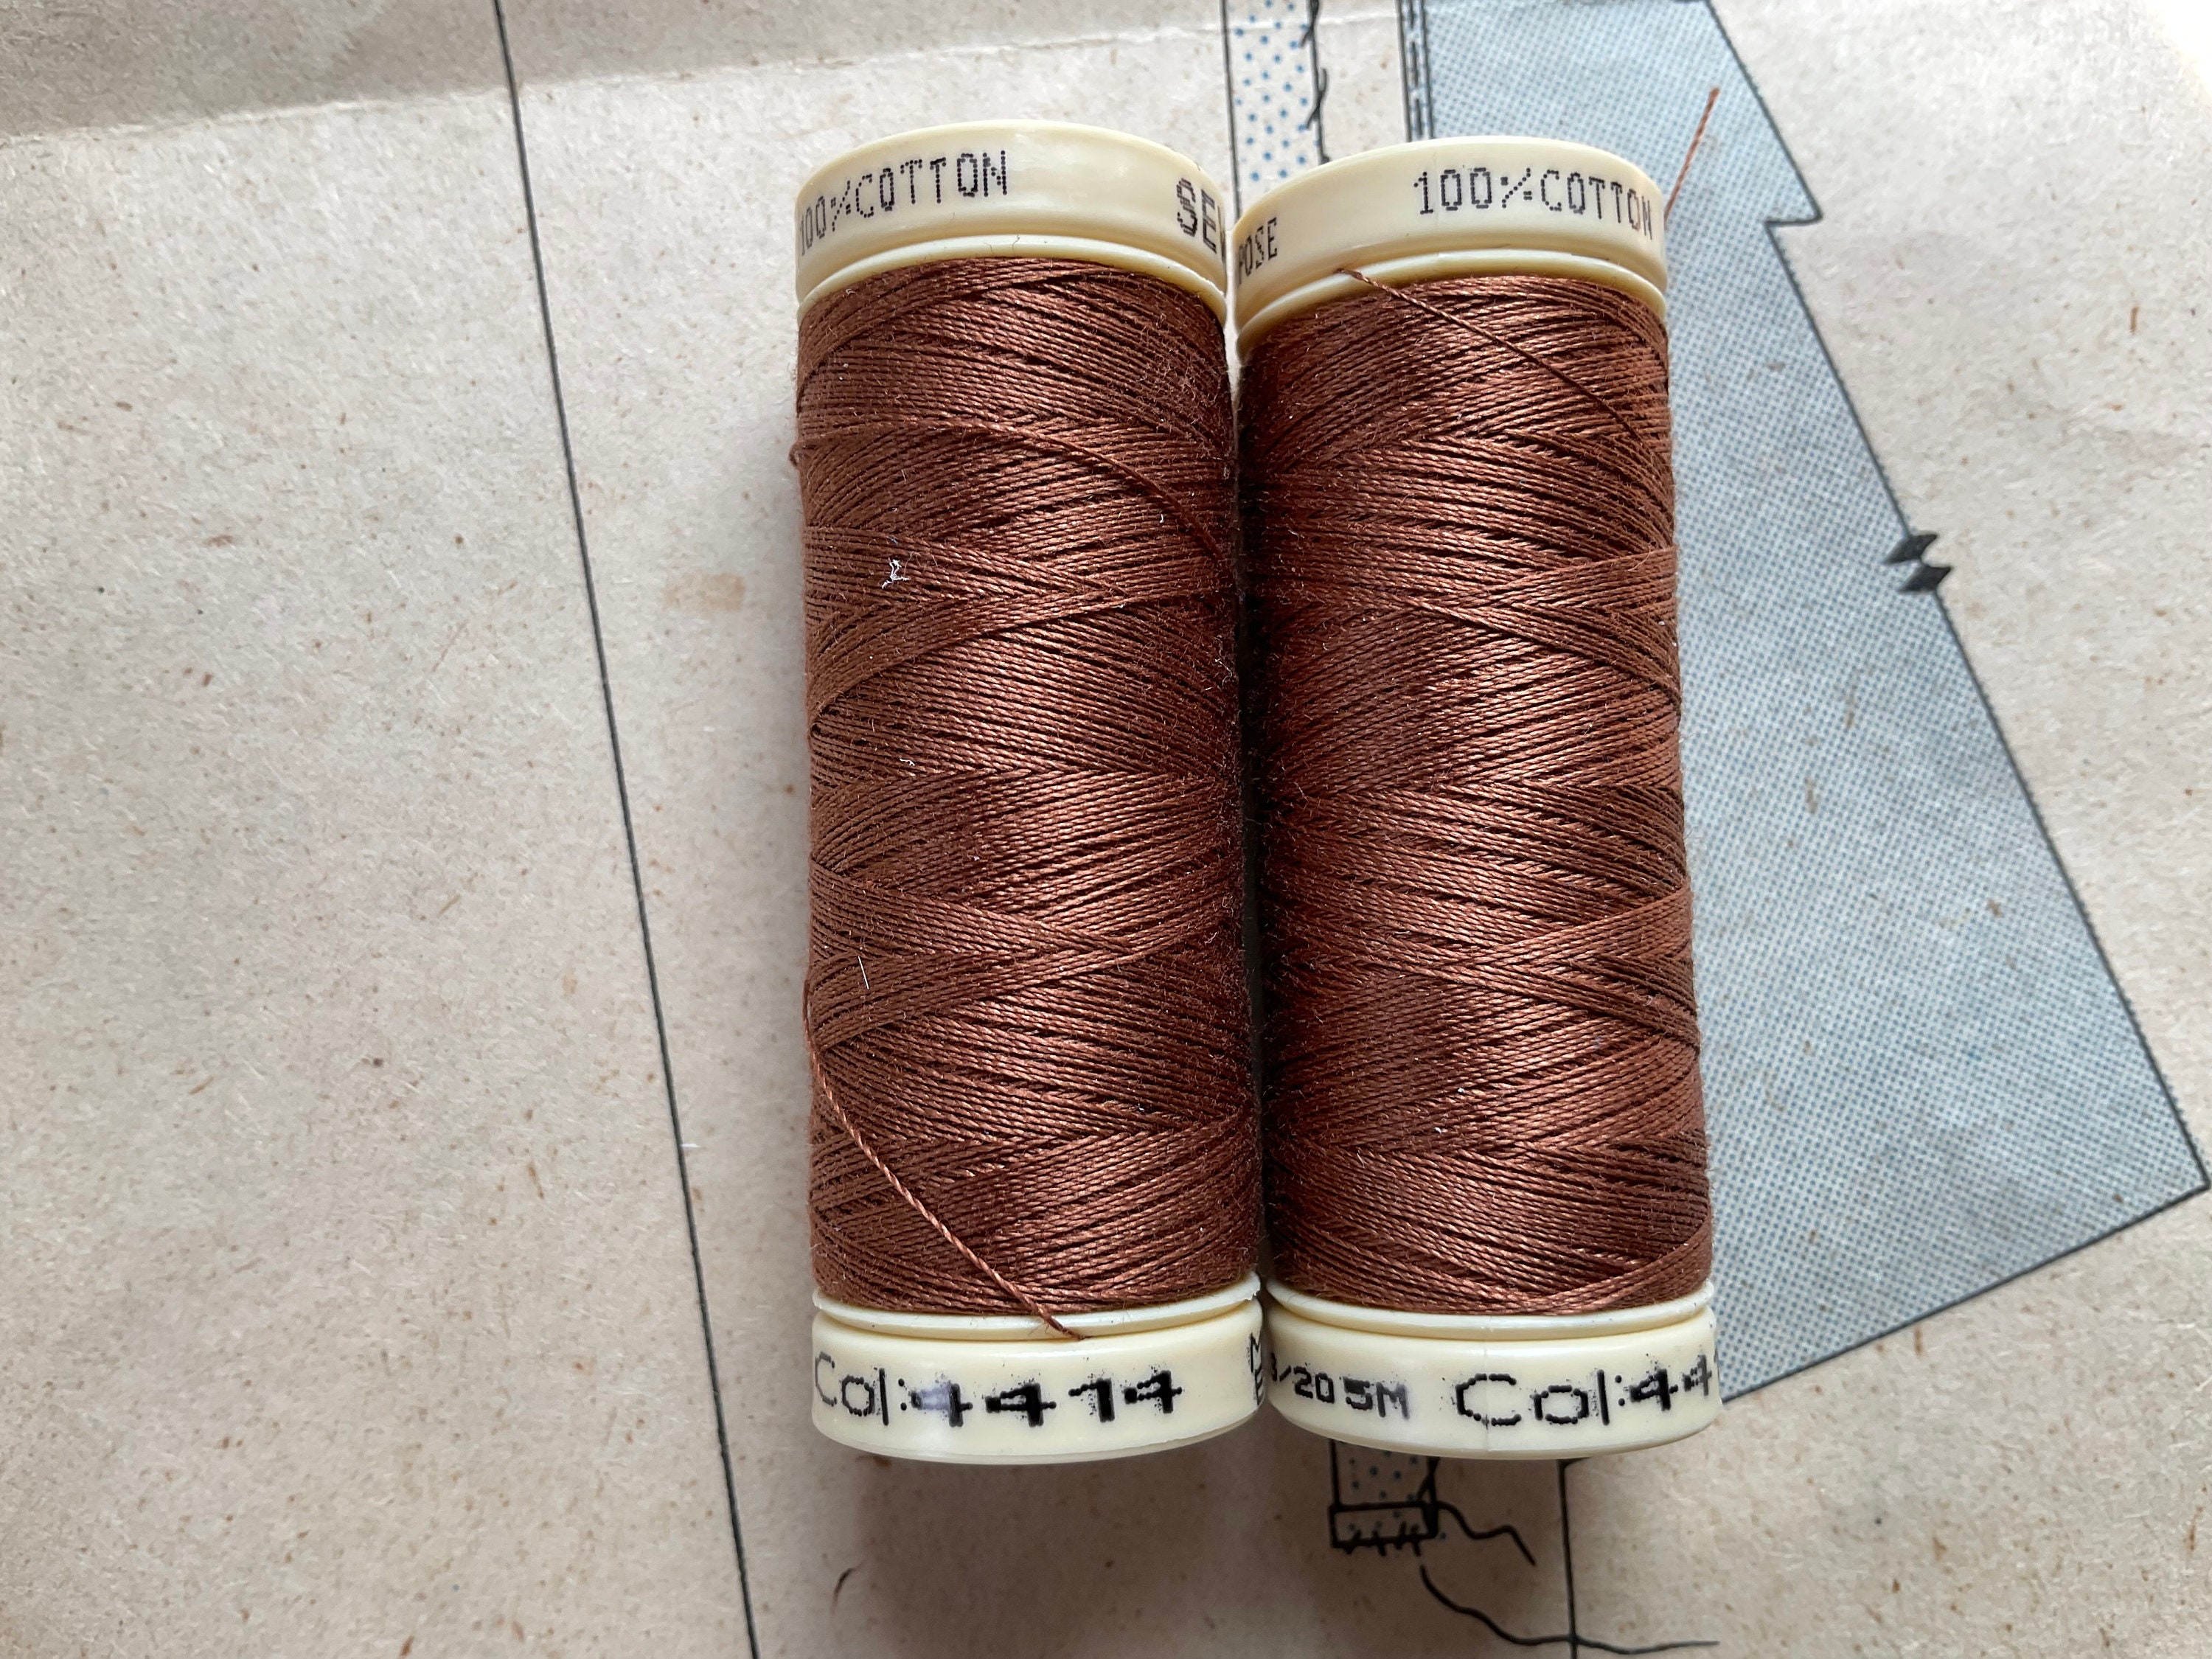 1 Spool Sew-ology Sewing Thread Ea 225 Yd 205m Cotton OR 250 Yard 228M Poly  Cotton 4011 4414 Poly 1248, 1303, 1357, 1446 All Purpose 